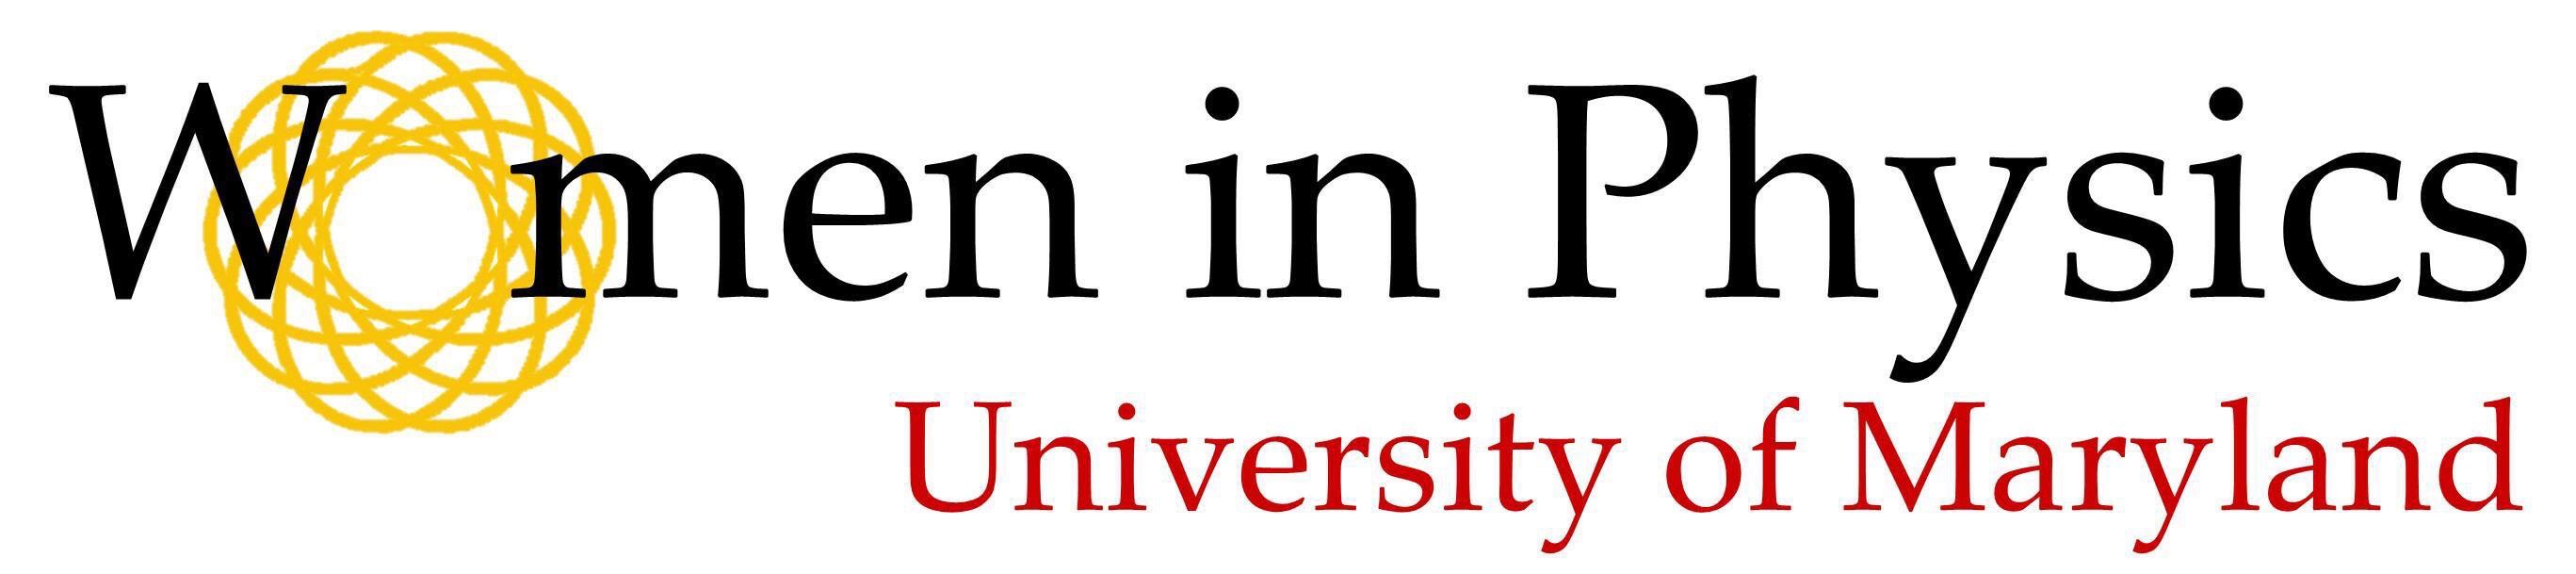 The text "Women in Physics University of Maryland". The text "Women in Physics" is in black and the text "University of Maryland" is in red. The "o" in "Women" is a yellow spiral circle.